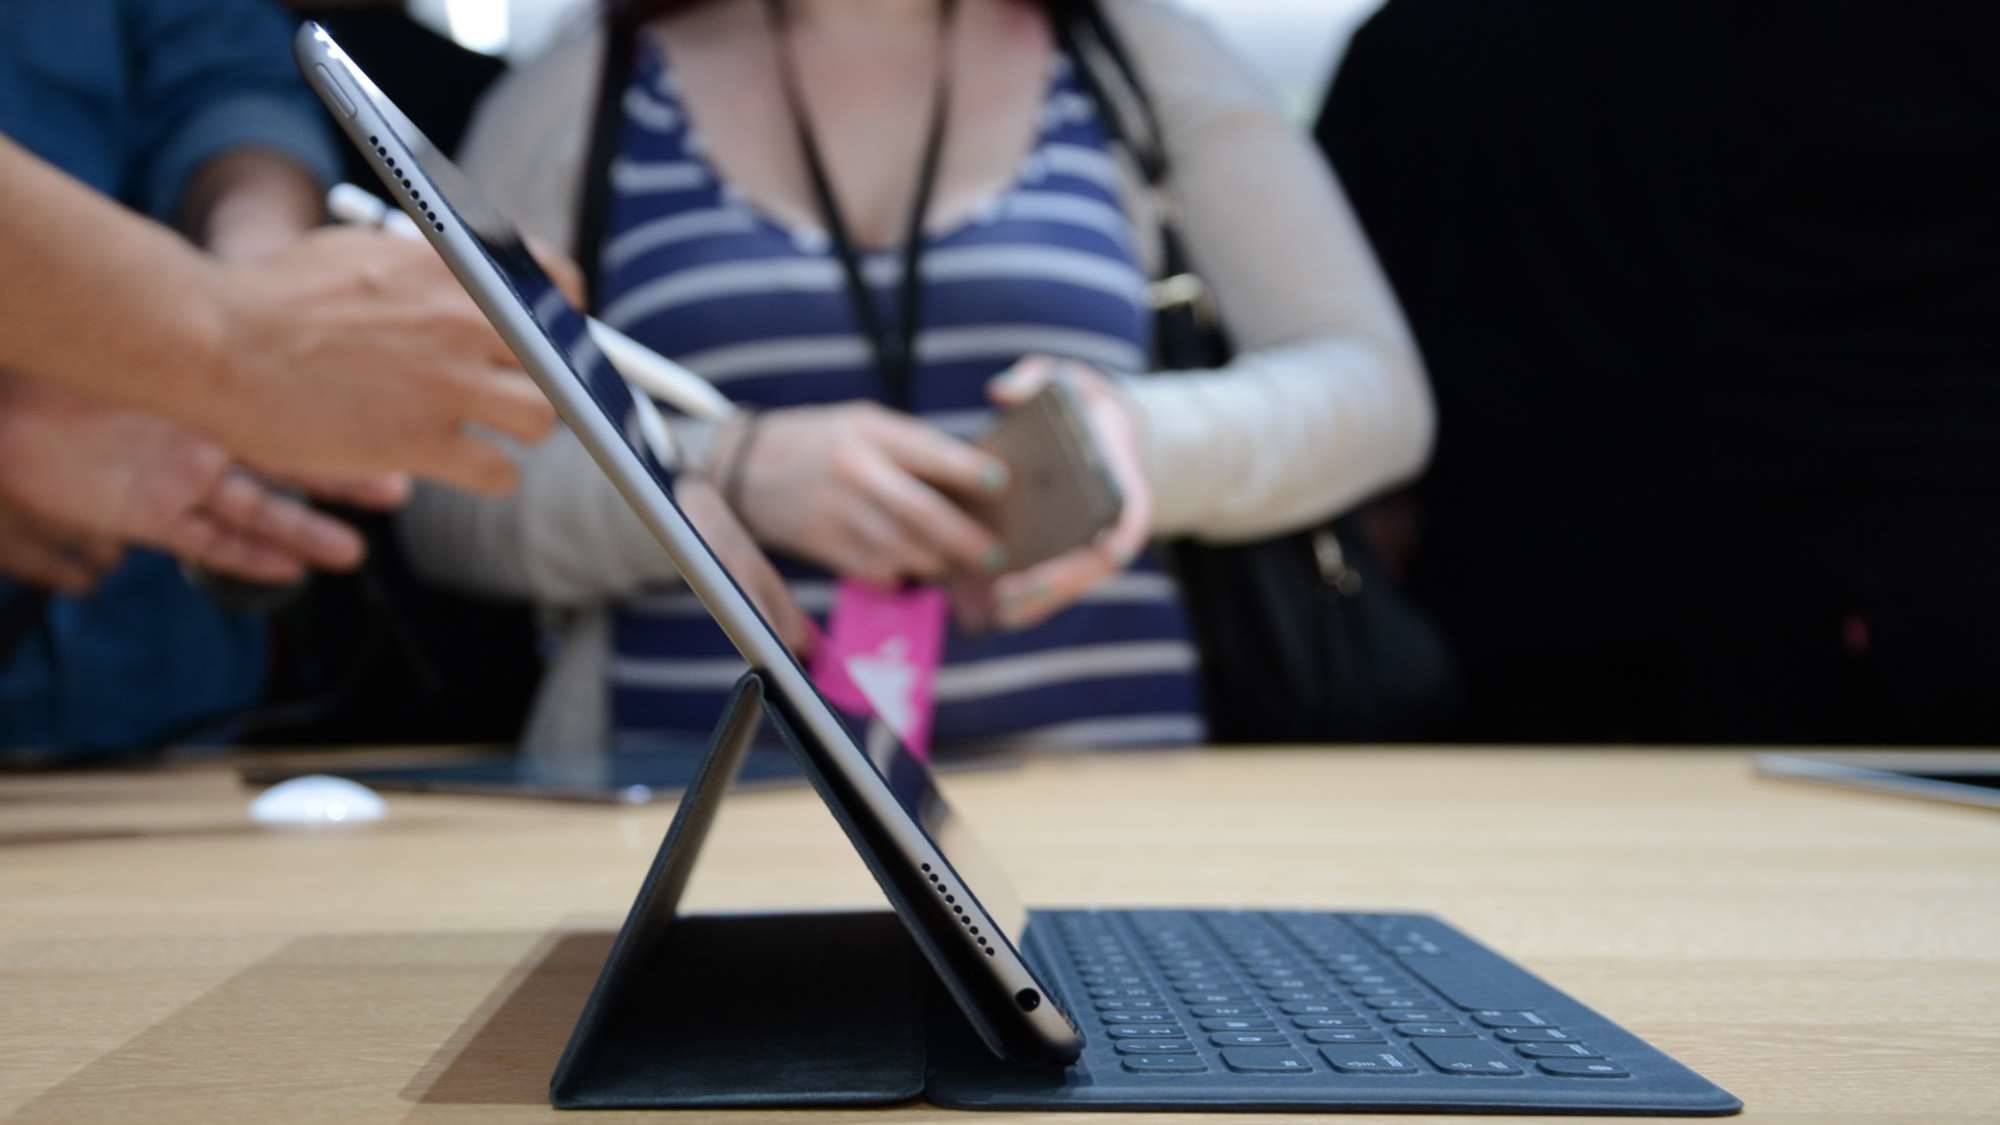 First look at Apple iPad Pro largerthanlife device that demands